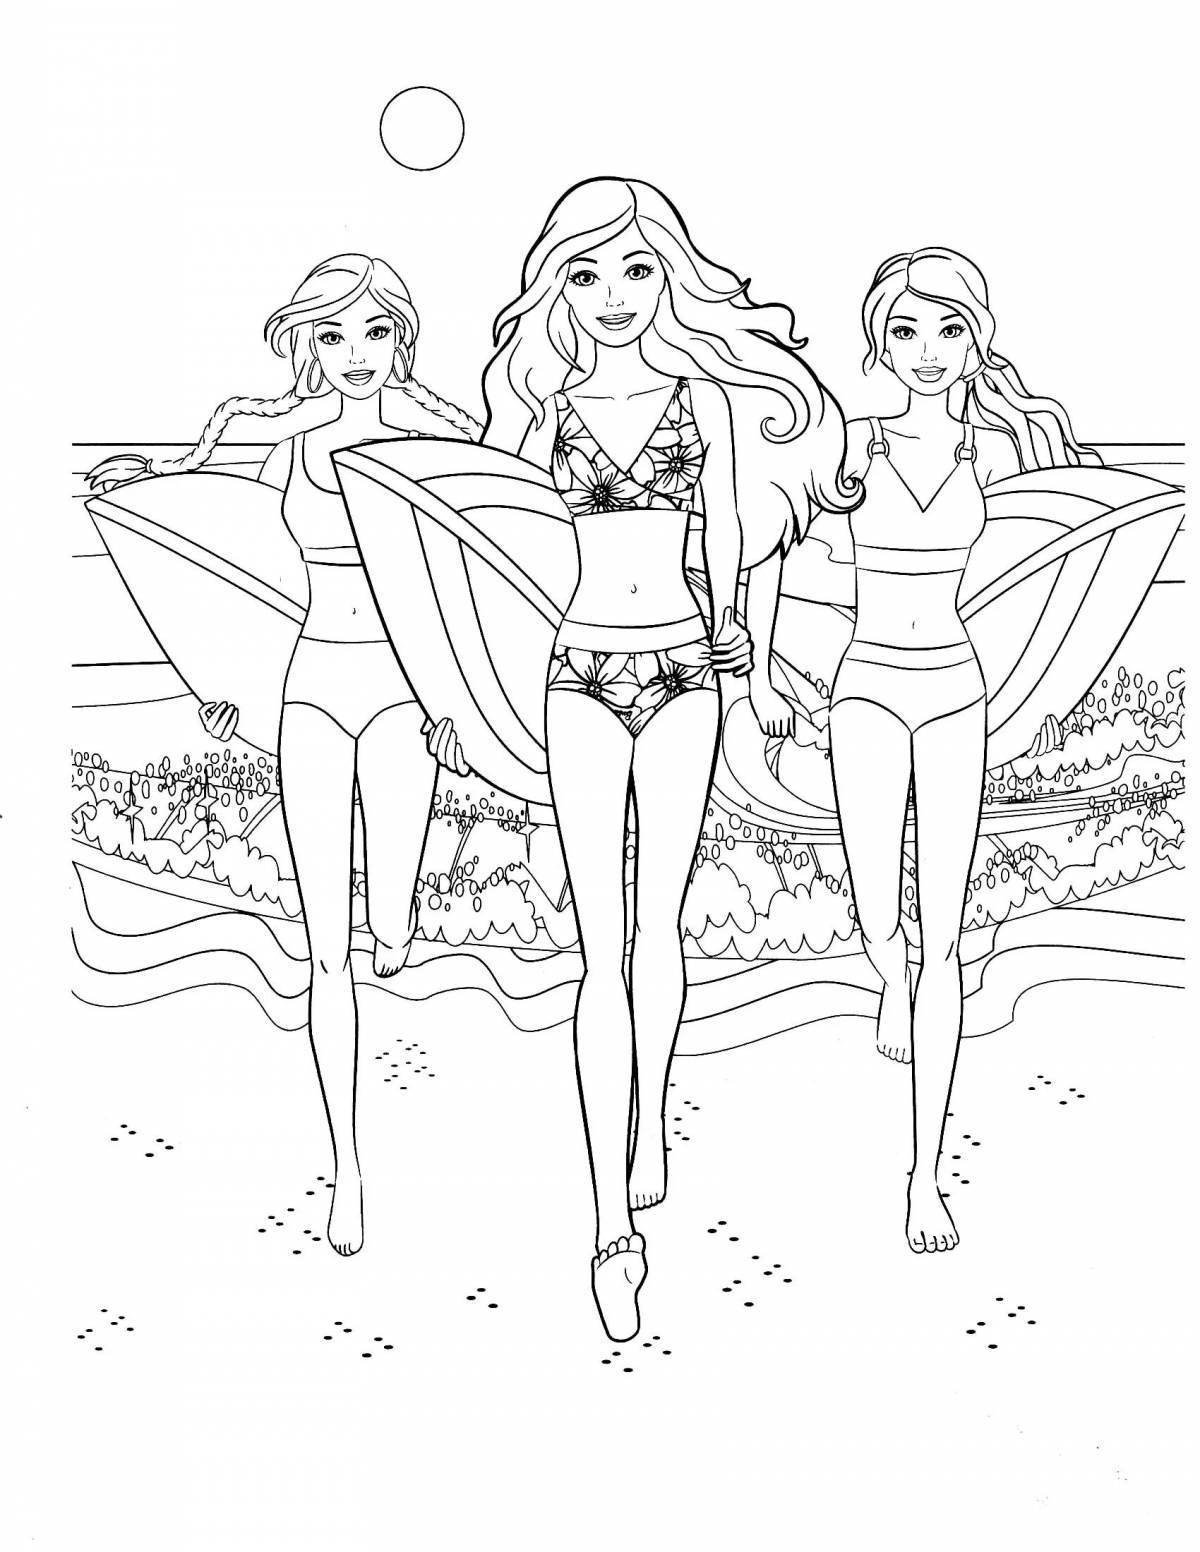 Coloring page brave doll in a bathing suit